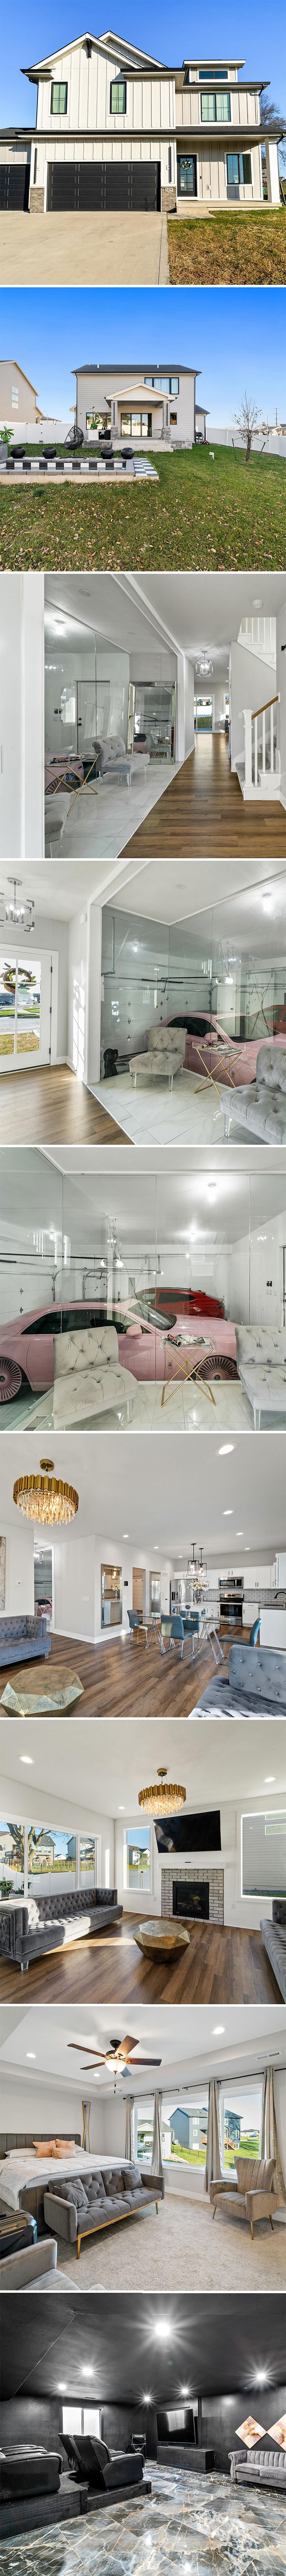 This Home Wins The Superlative For “Most Unique Way To Show Off Your Car Collection” $500,000